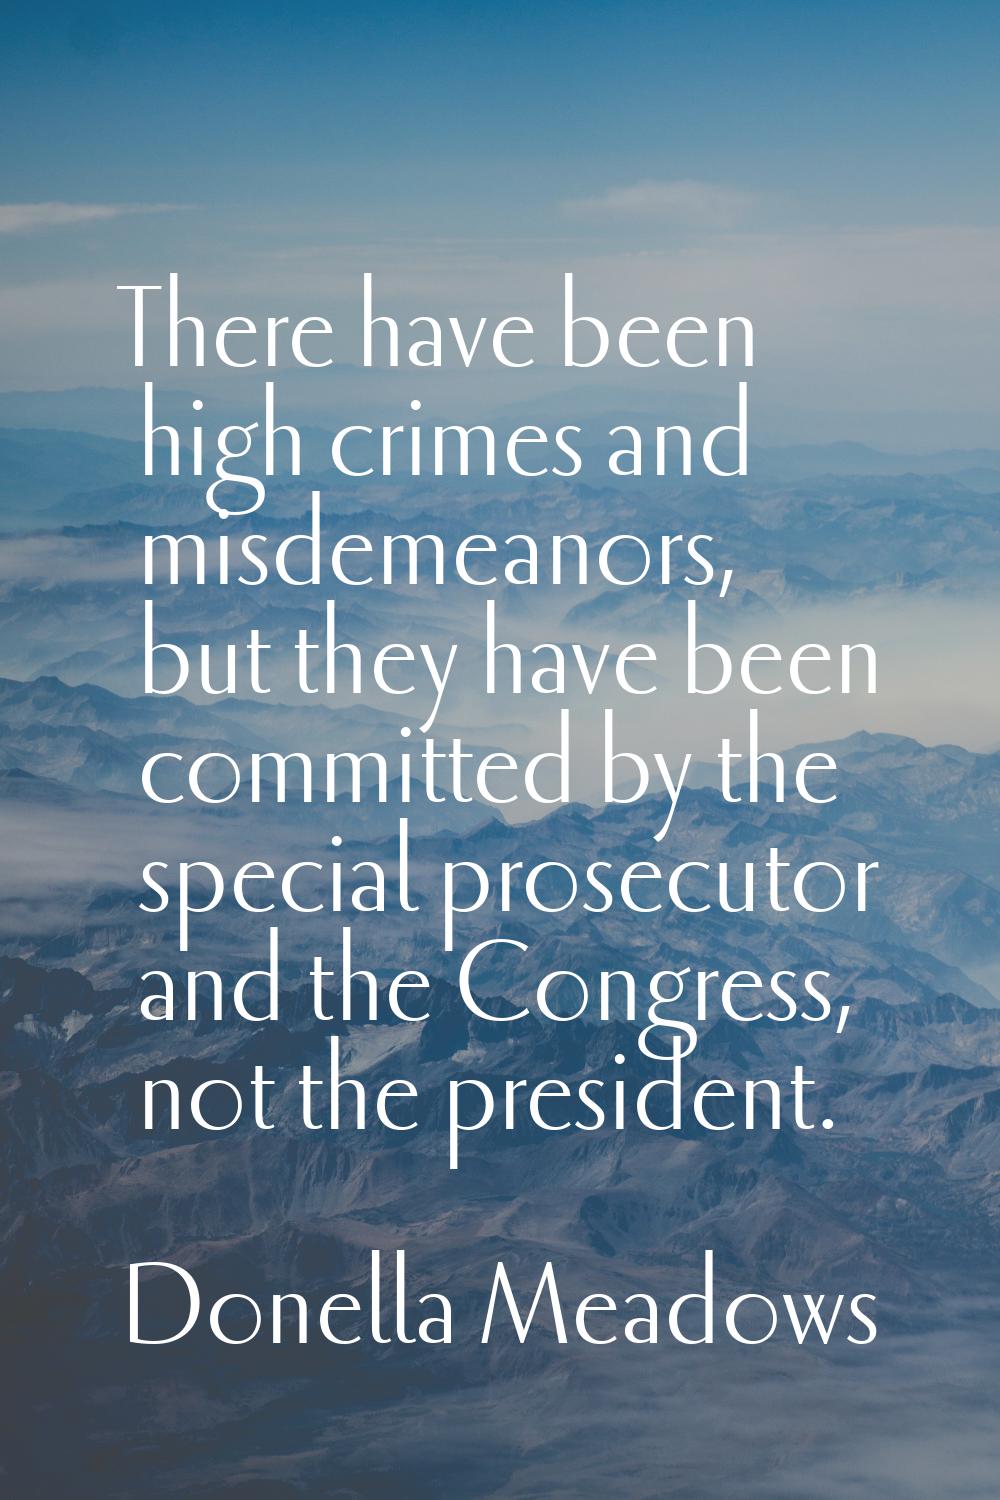 There have been high crimes and misdemeanors, but they have been committed by the special prosecuto